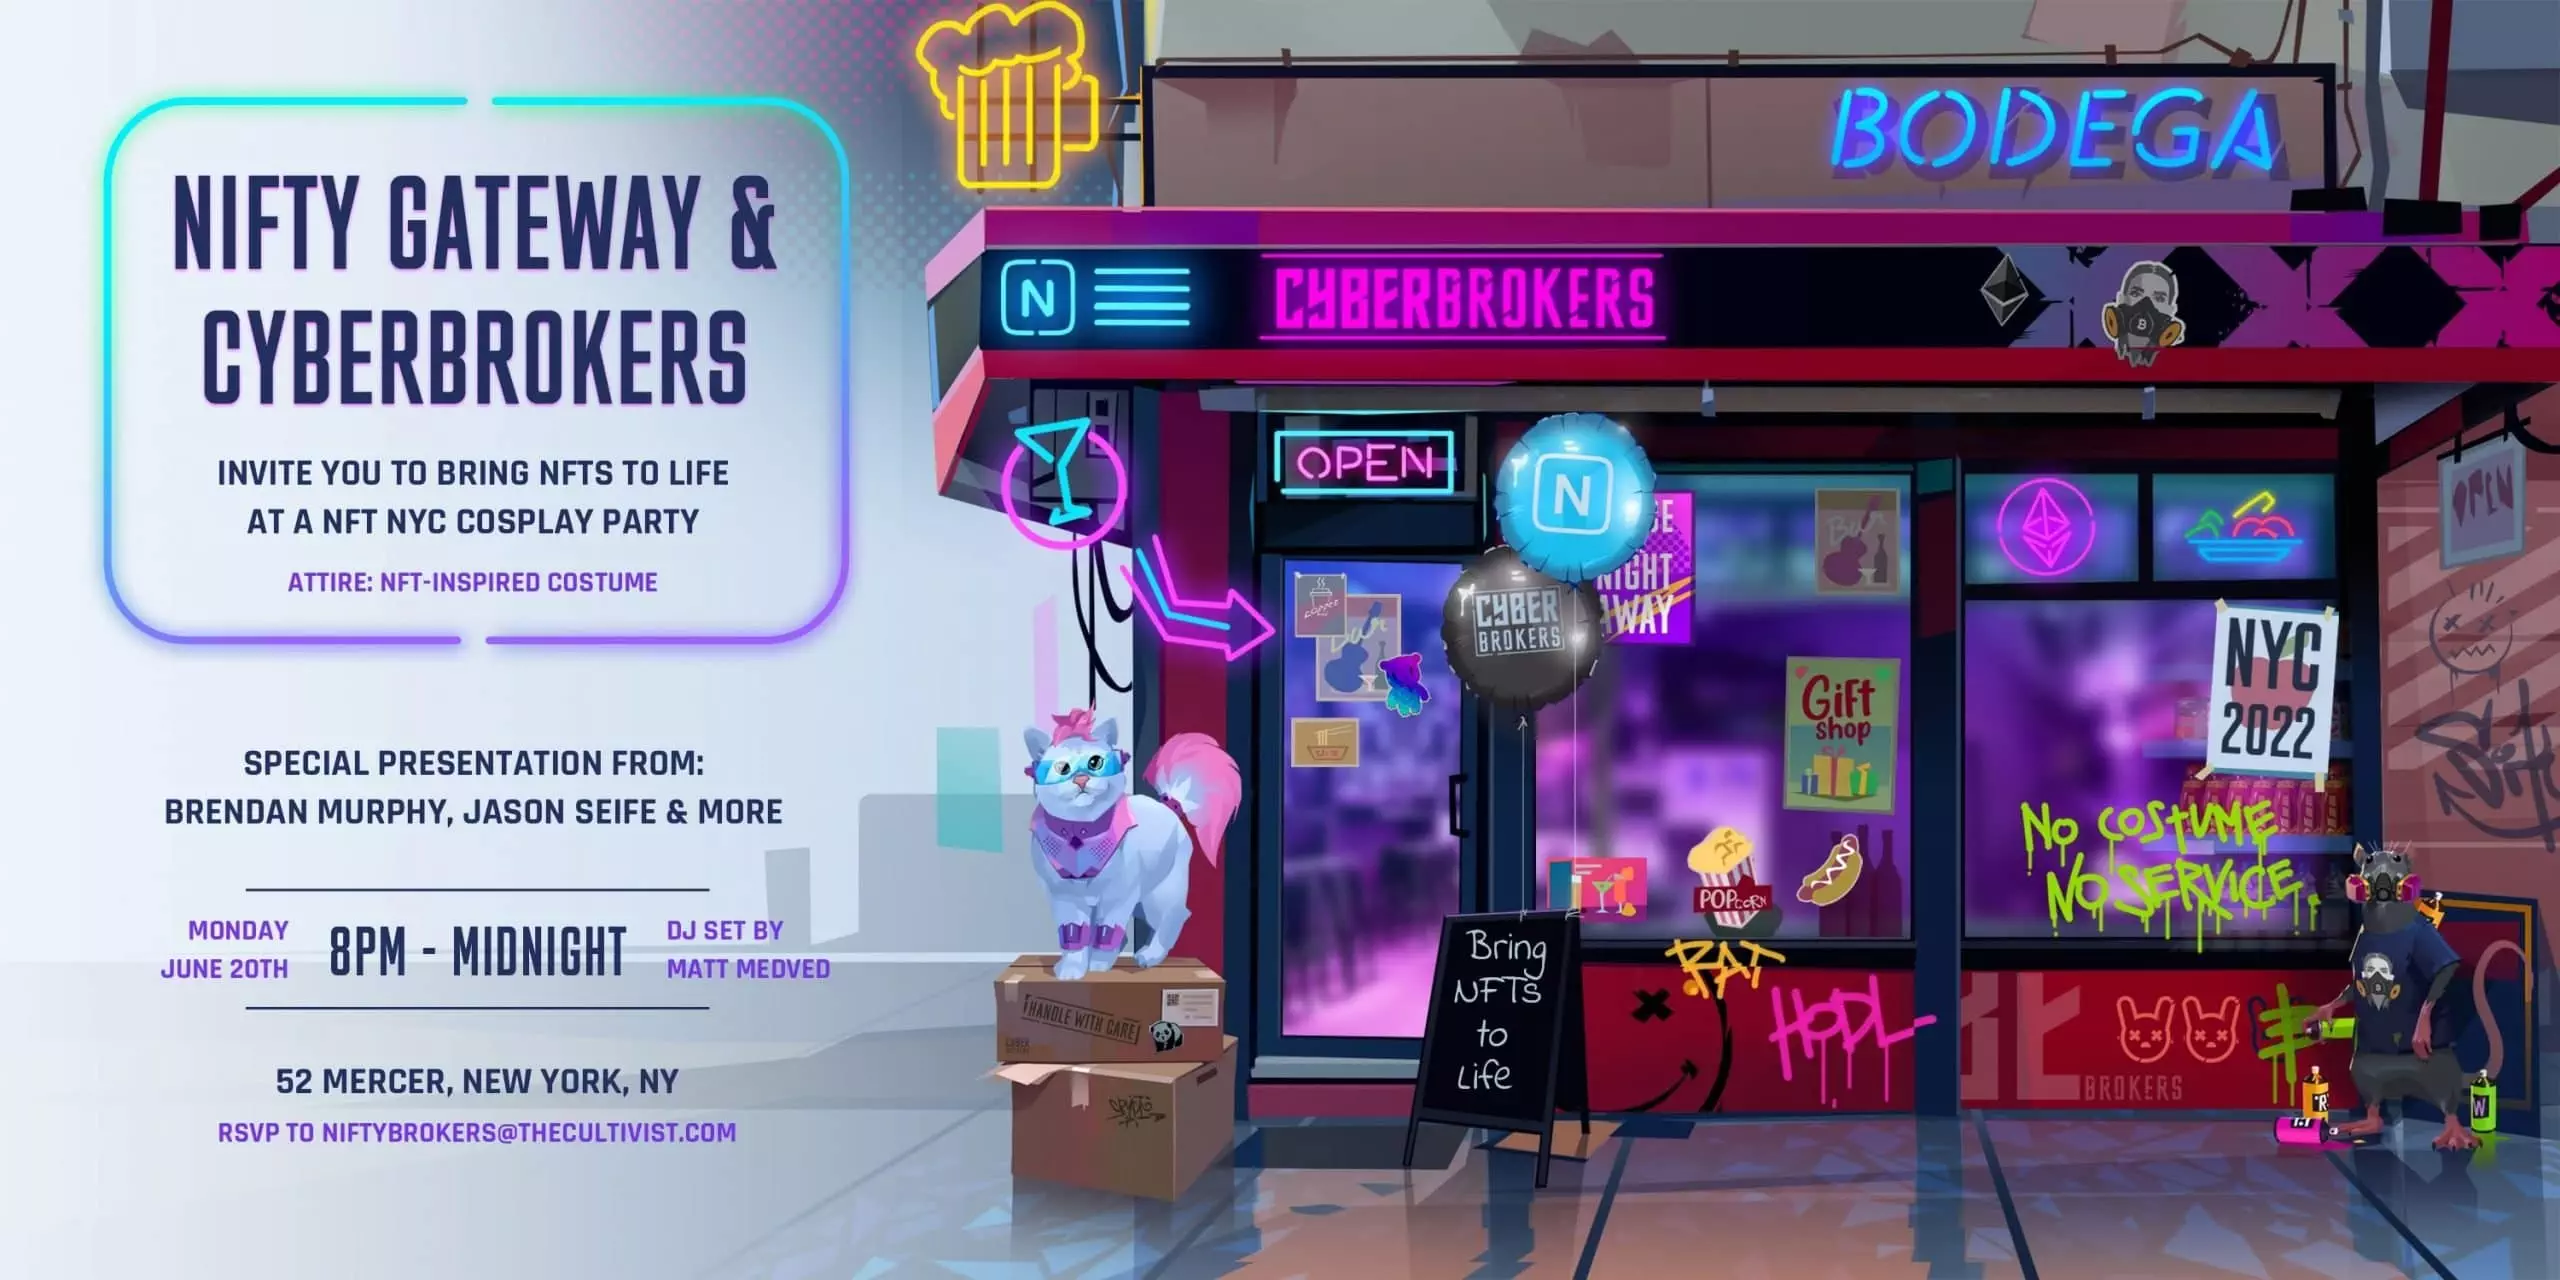 Nifty Gateway x Cyberbrokers NFT.NYC party poster